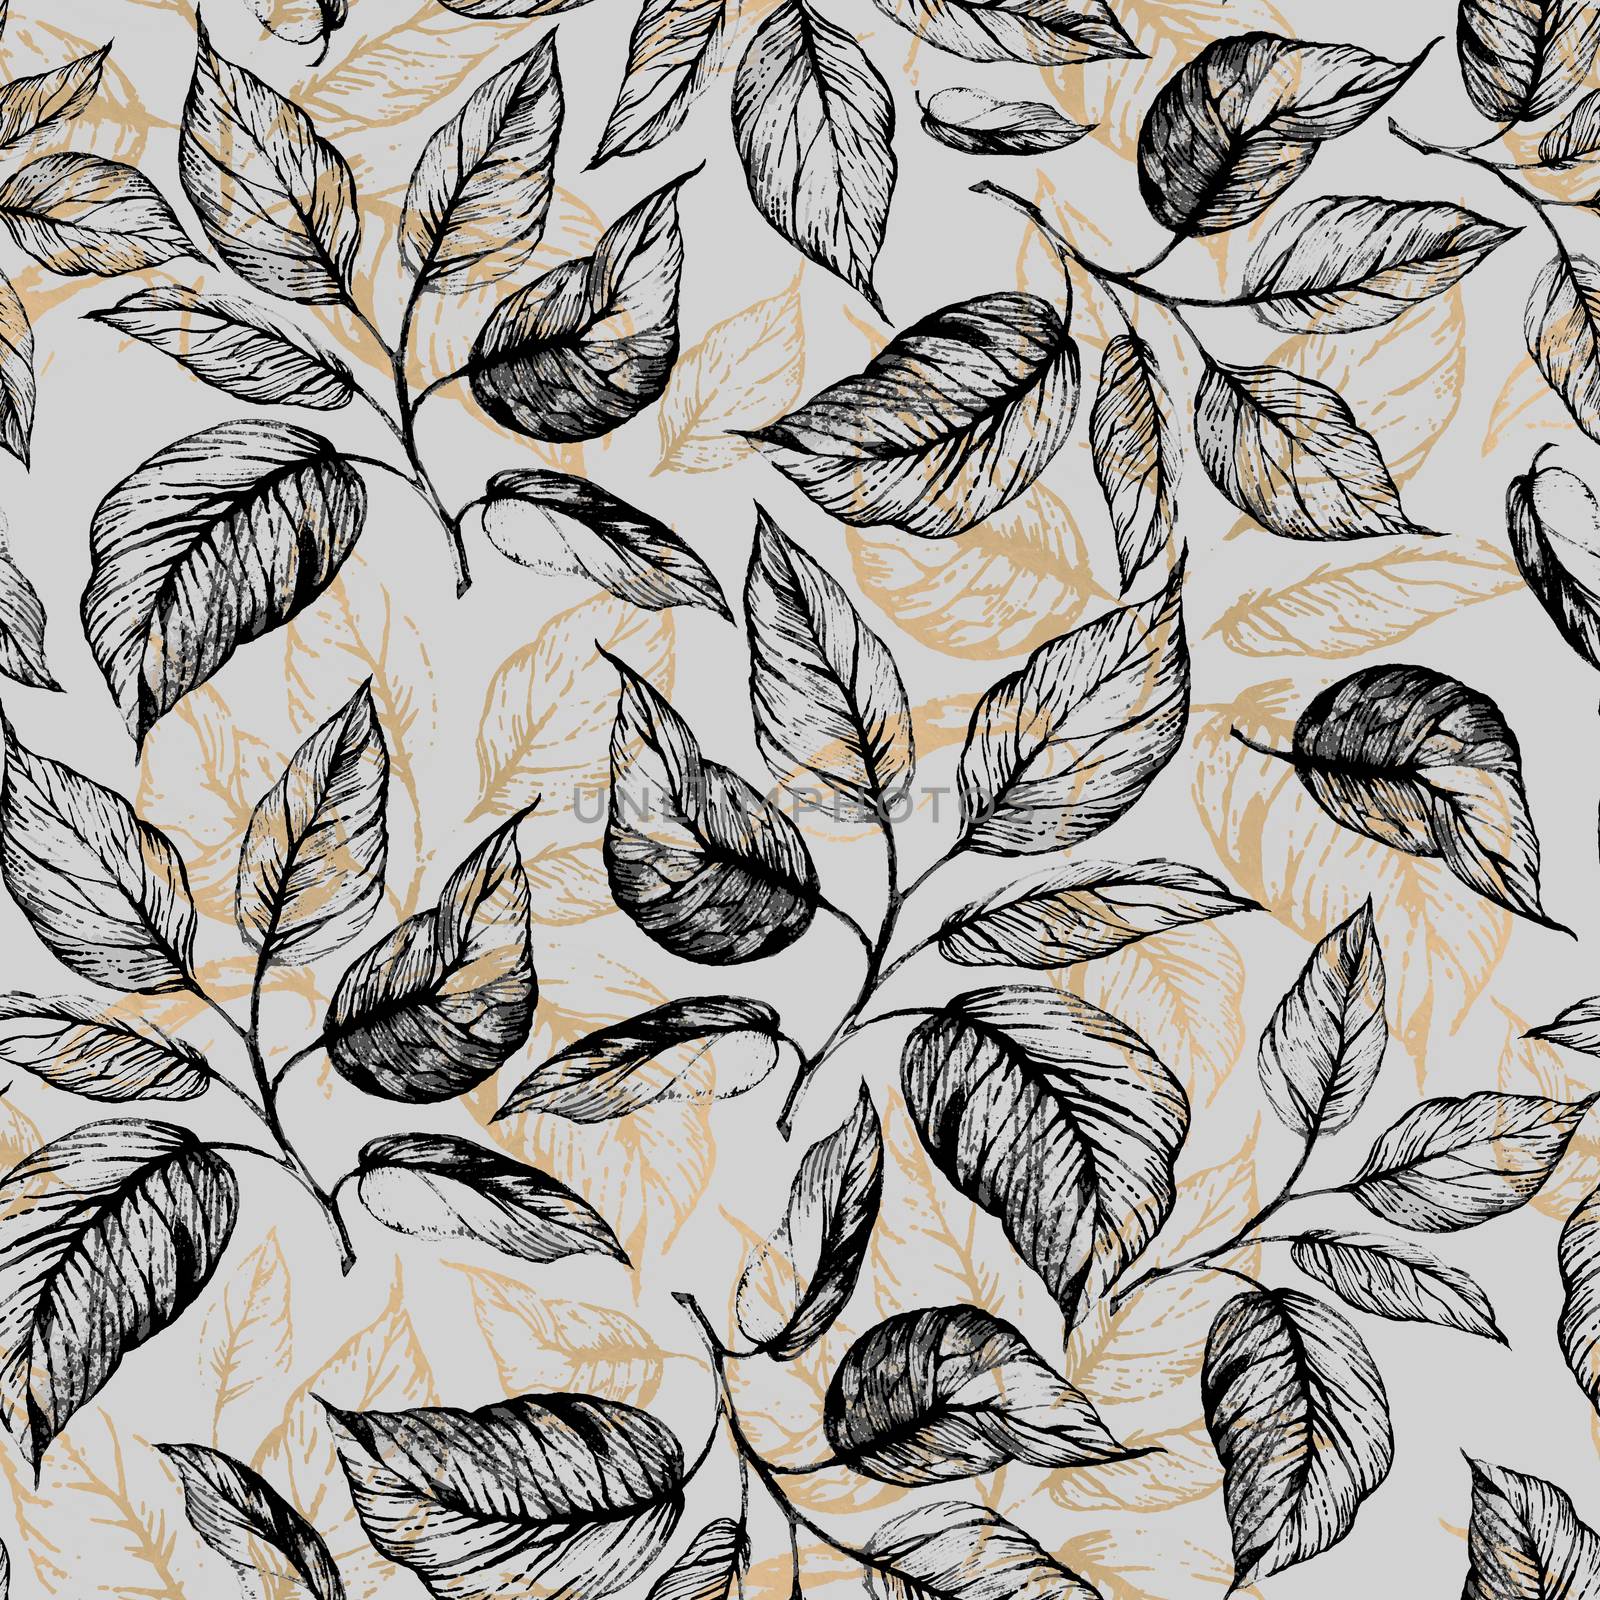 Seamless pattern - Hand drawn twig with leaves in gray scale and leaves contour of golden foil on grey background by LanaLeta